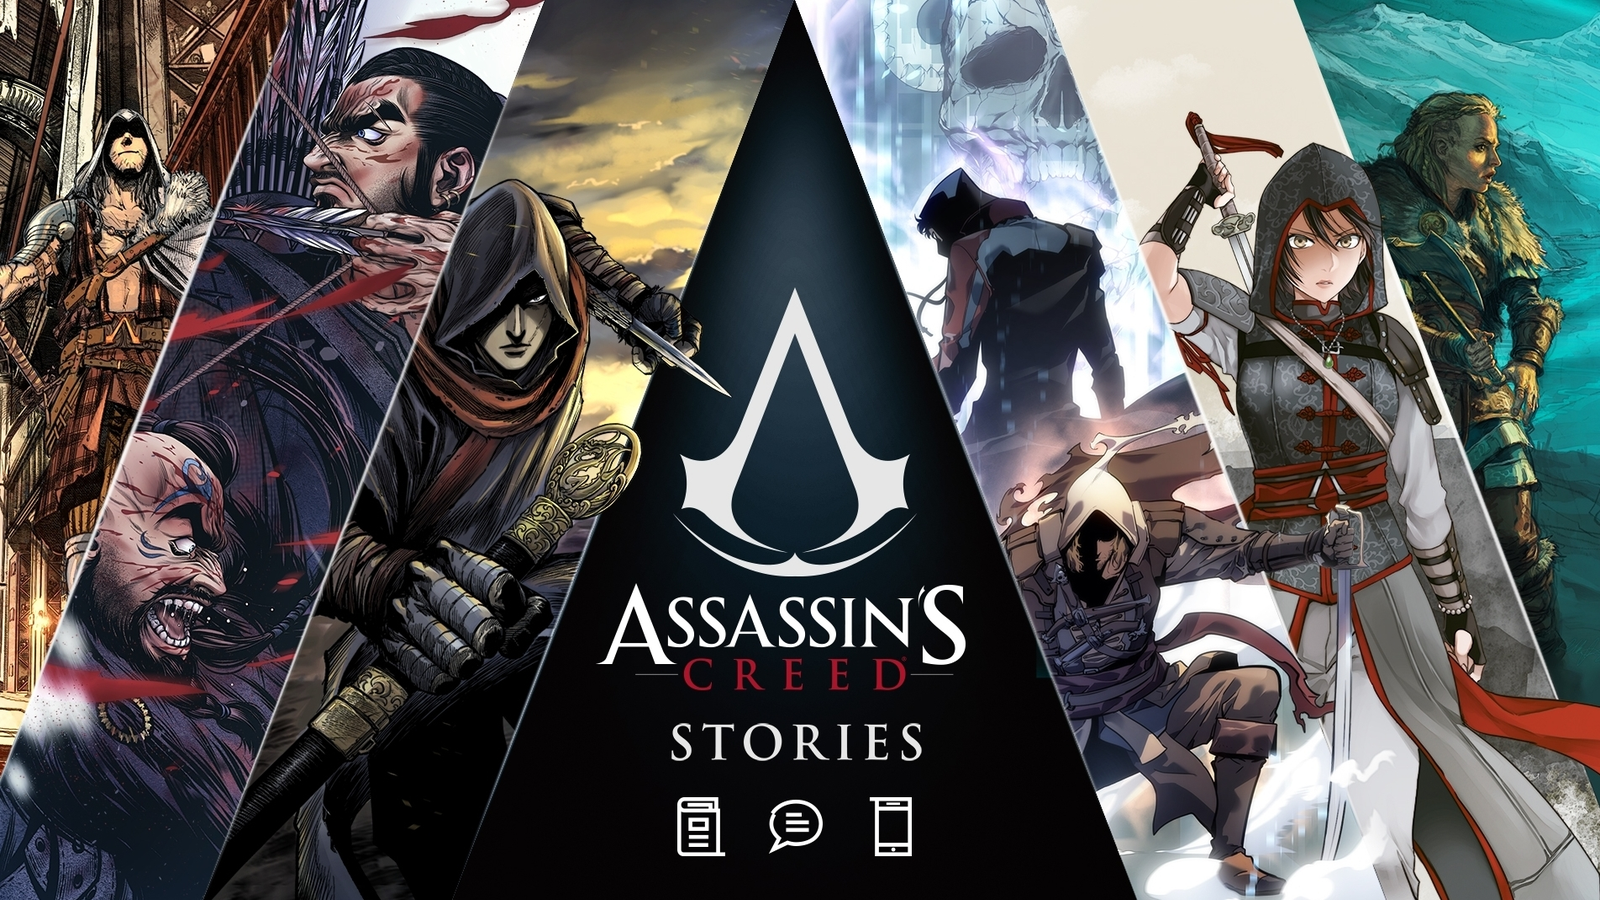 Assassin's Creed 1: Desmond, Assassin's Creed Wiki